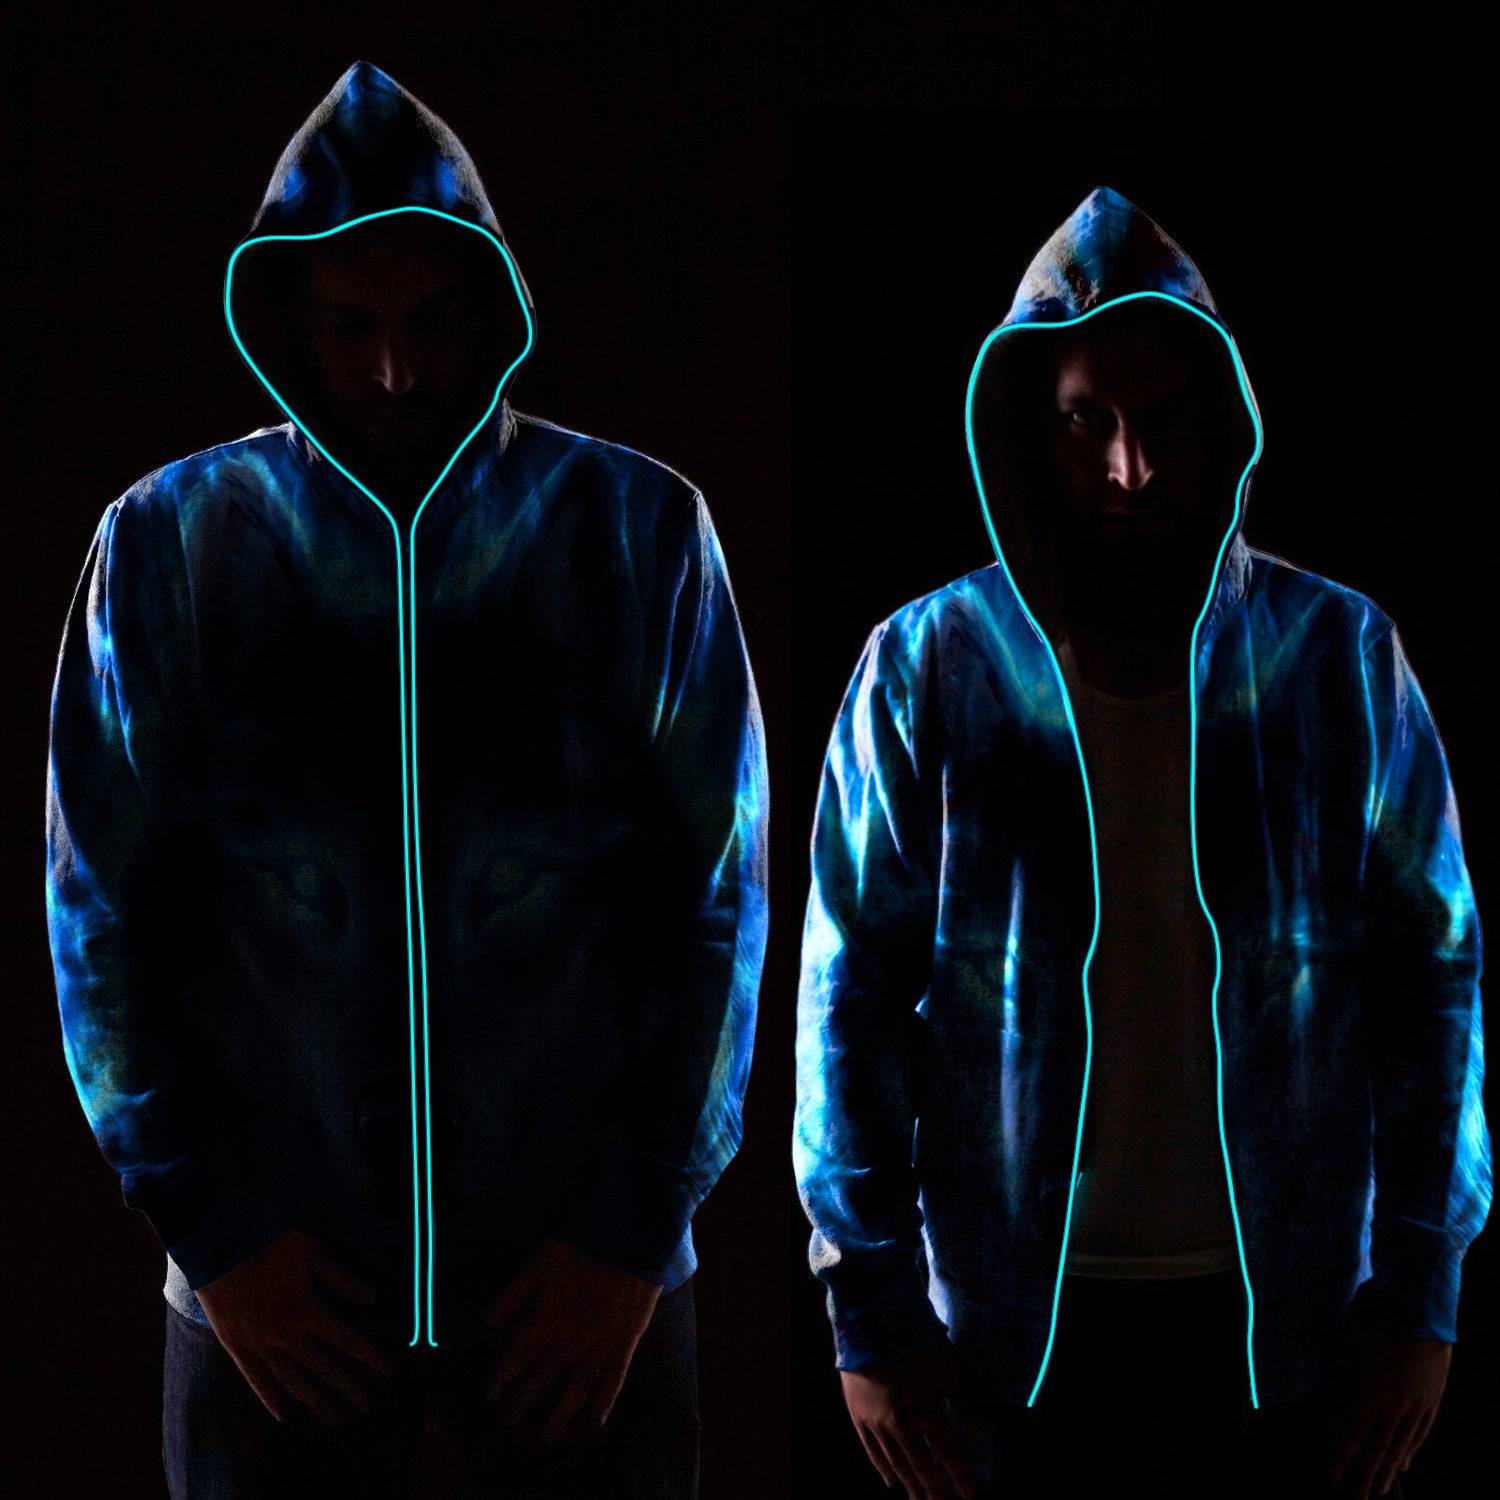 Two individuals wear glowing Maramalive™ Photoelectric Hoodies with neon trim, standing against a dark background. One hoodie's glow is more pronounced, outlining both figures in luminous blue light, perfectly capturing the essence of street style.